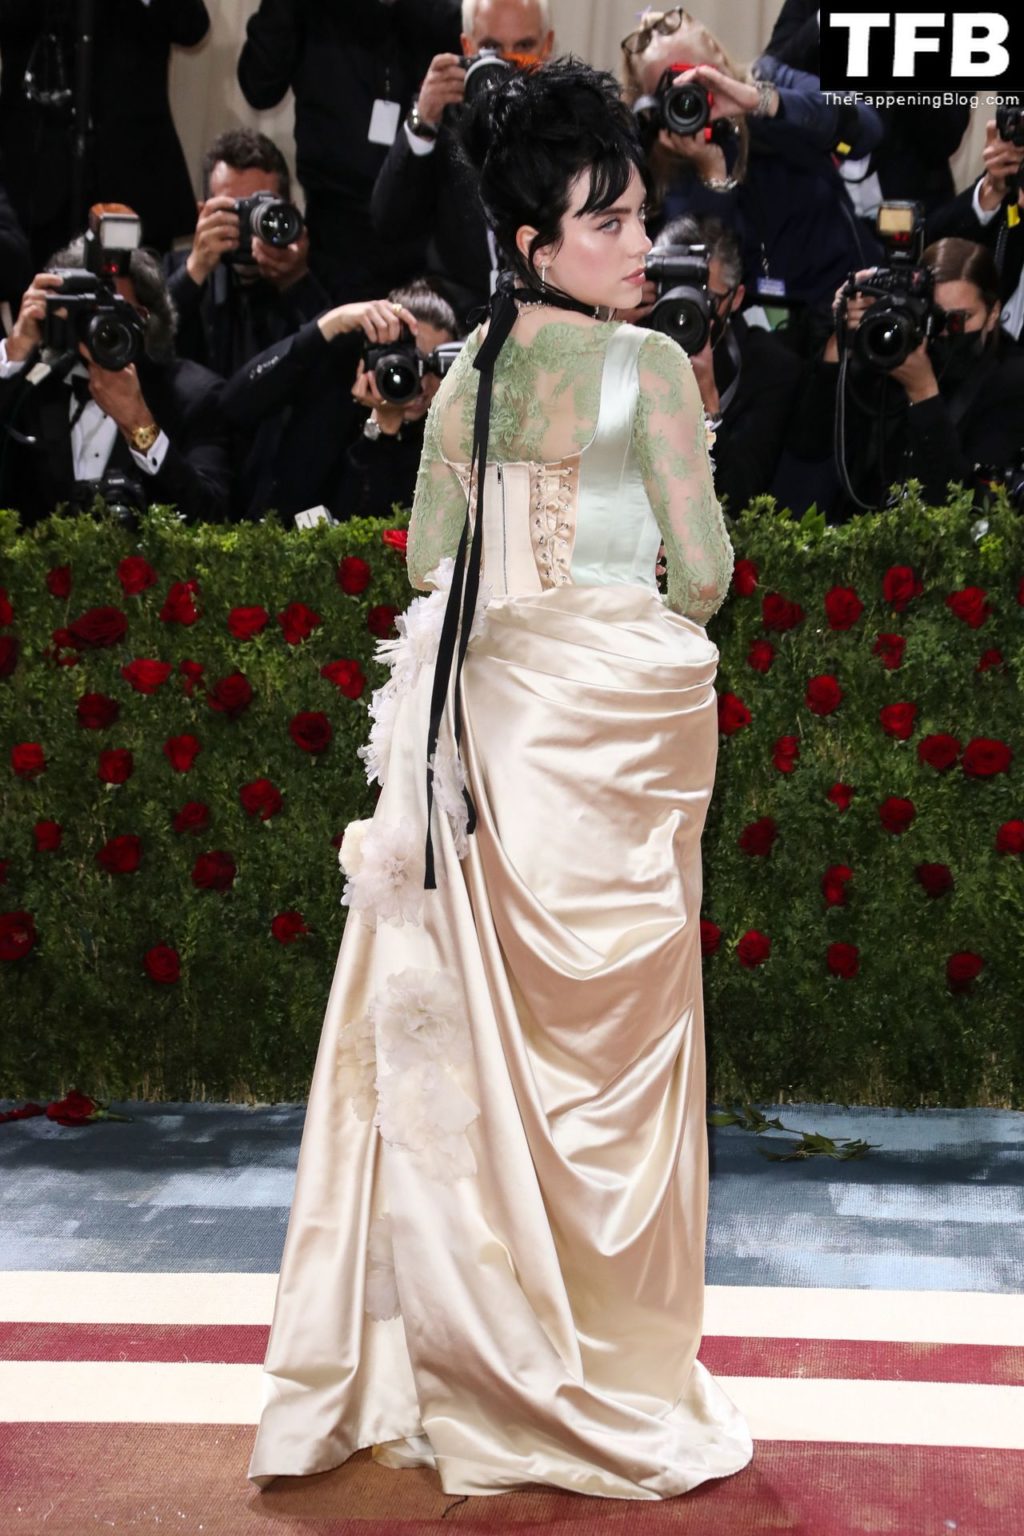 Billie Eilish Sexy The Fappening Blog 141 1024x1536 - Billie Eilish Showcases Nice Cleavage at The 2022 Met Gala in NYC (155 Photos)